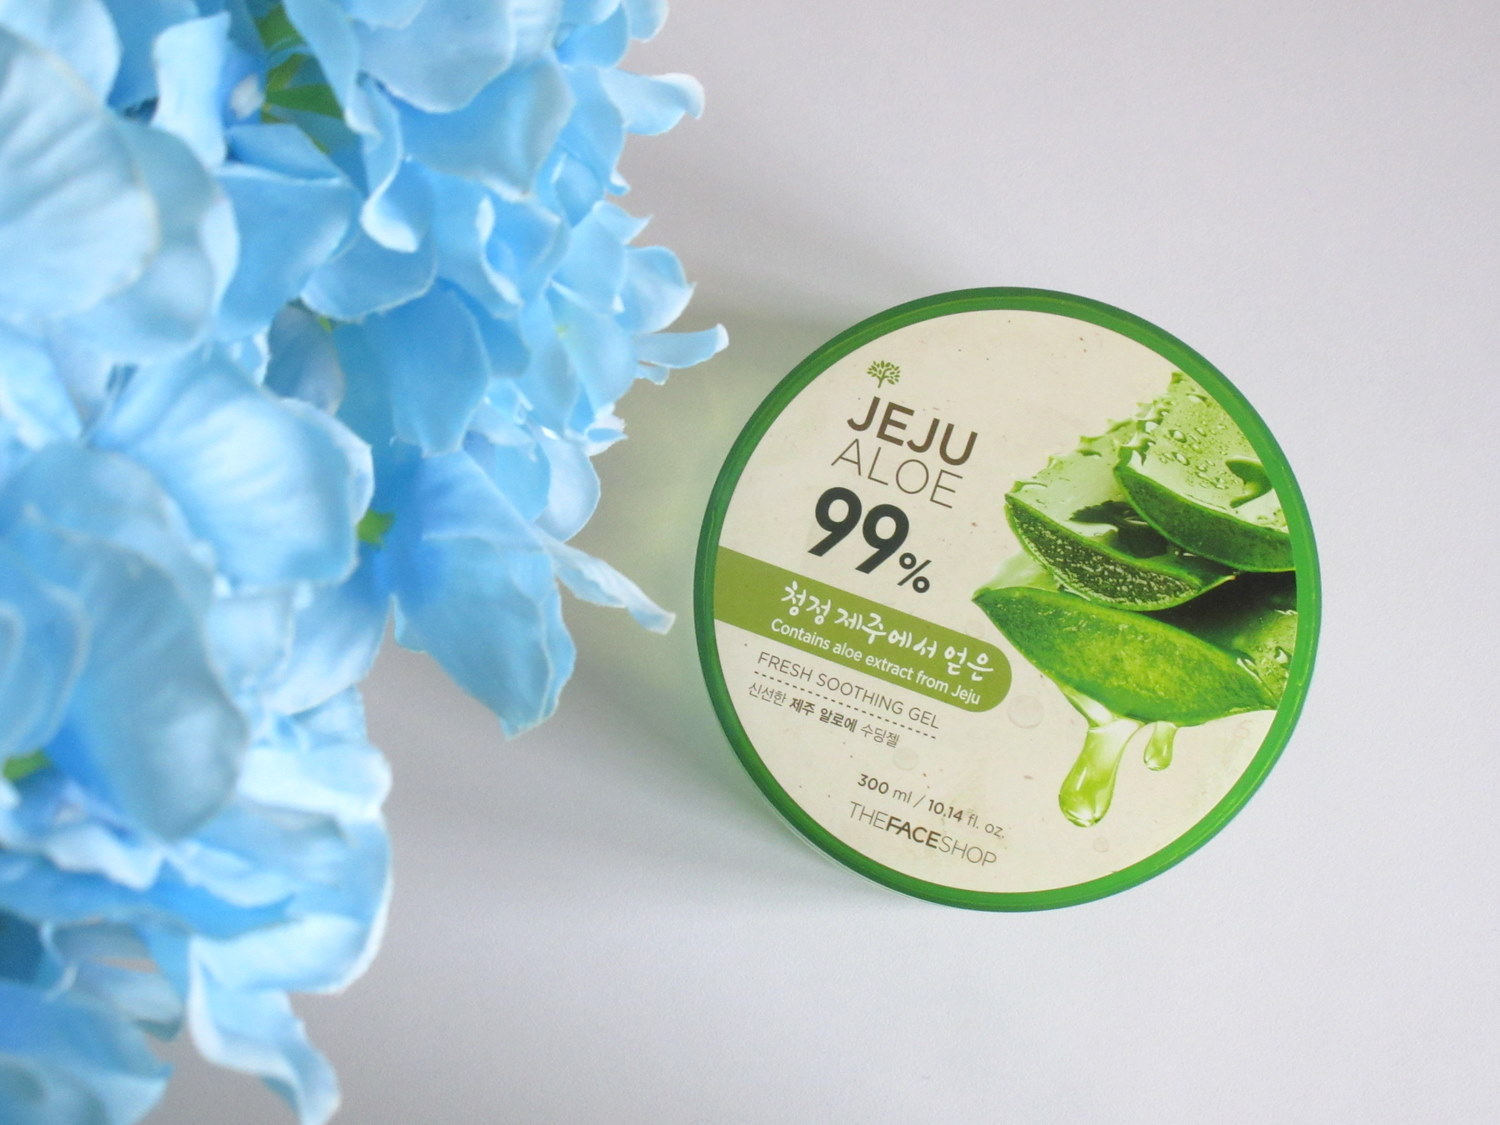 Review: The Face Shop Fresh Jeju Aloe 99% Soothing Gel.